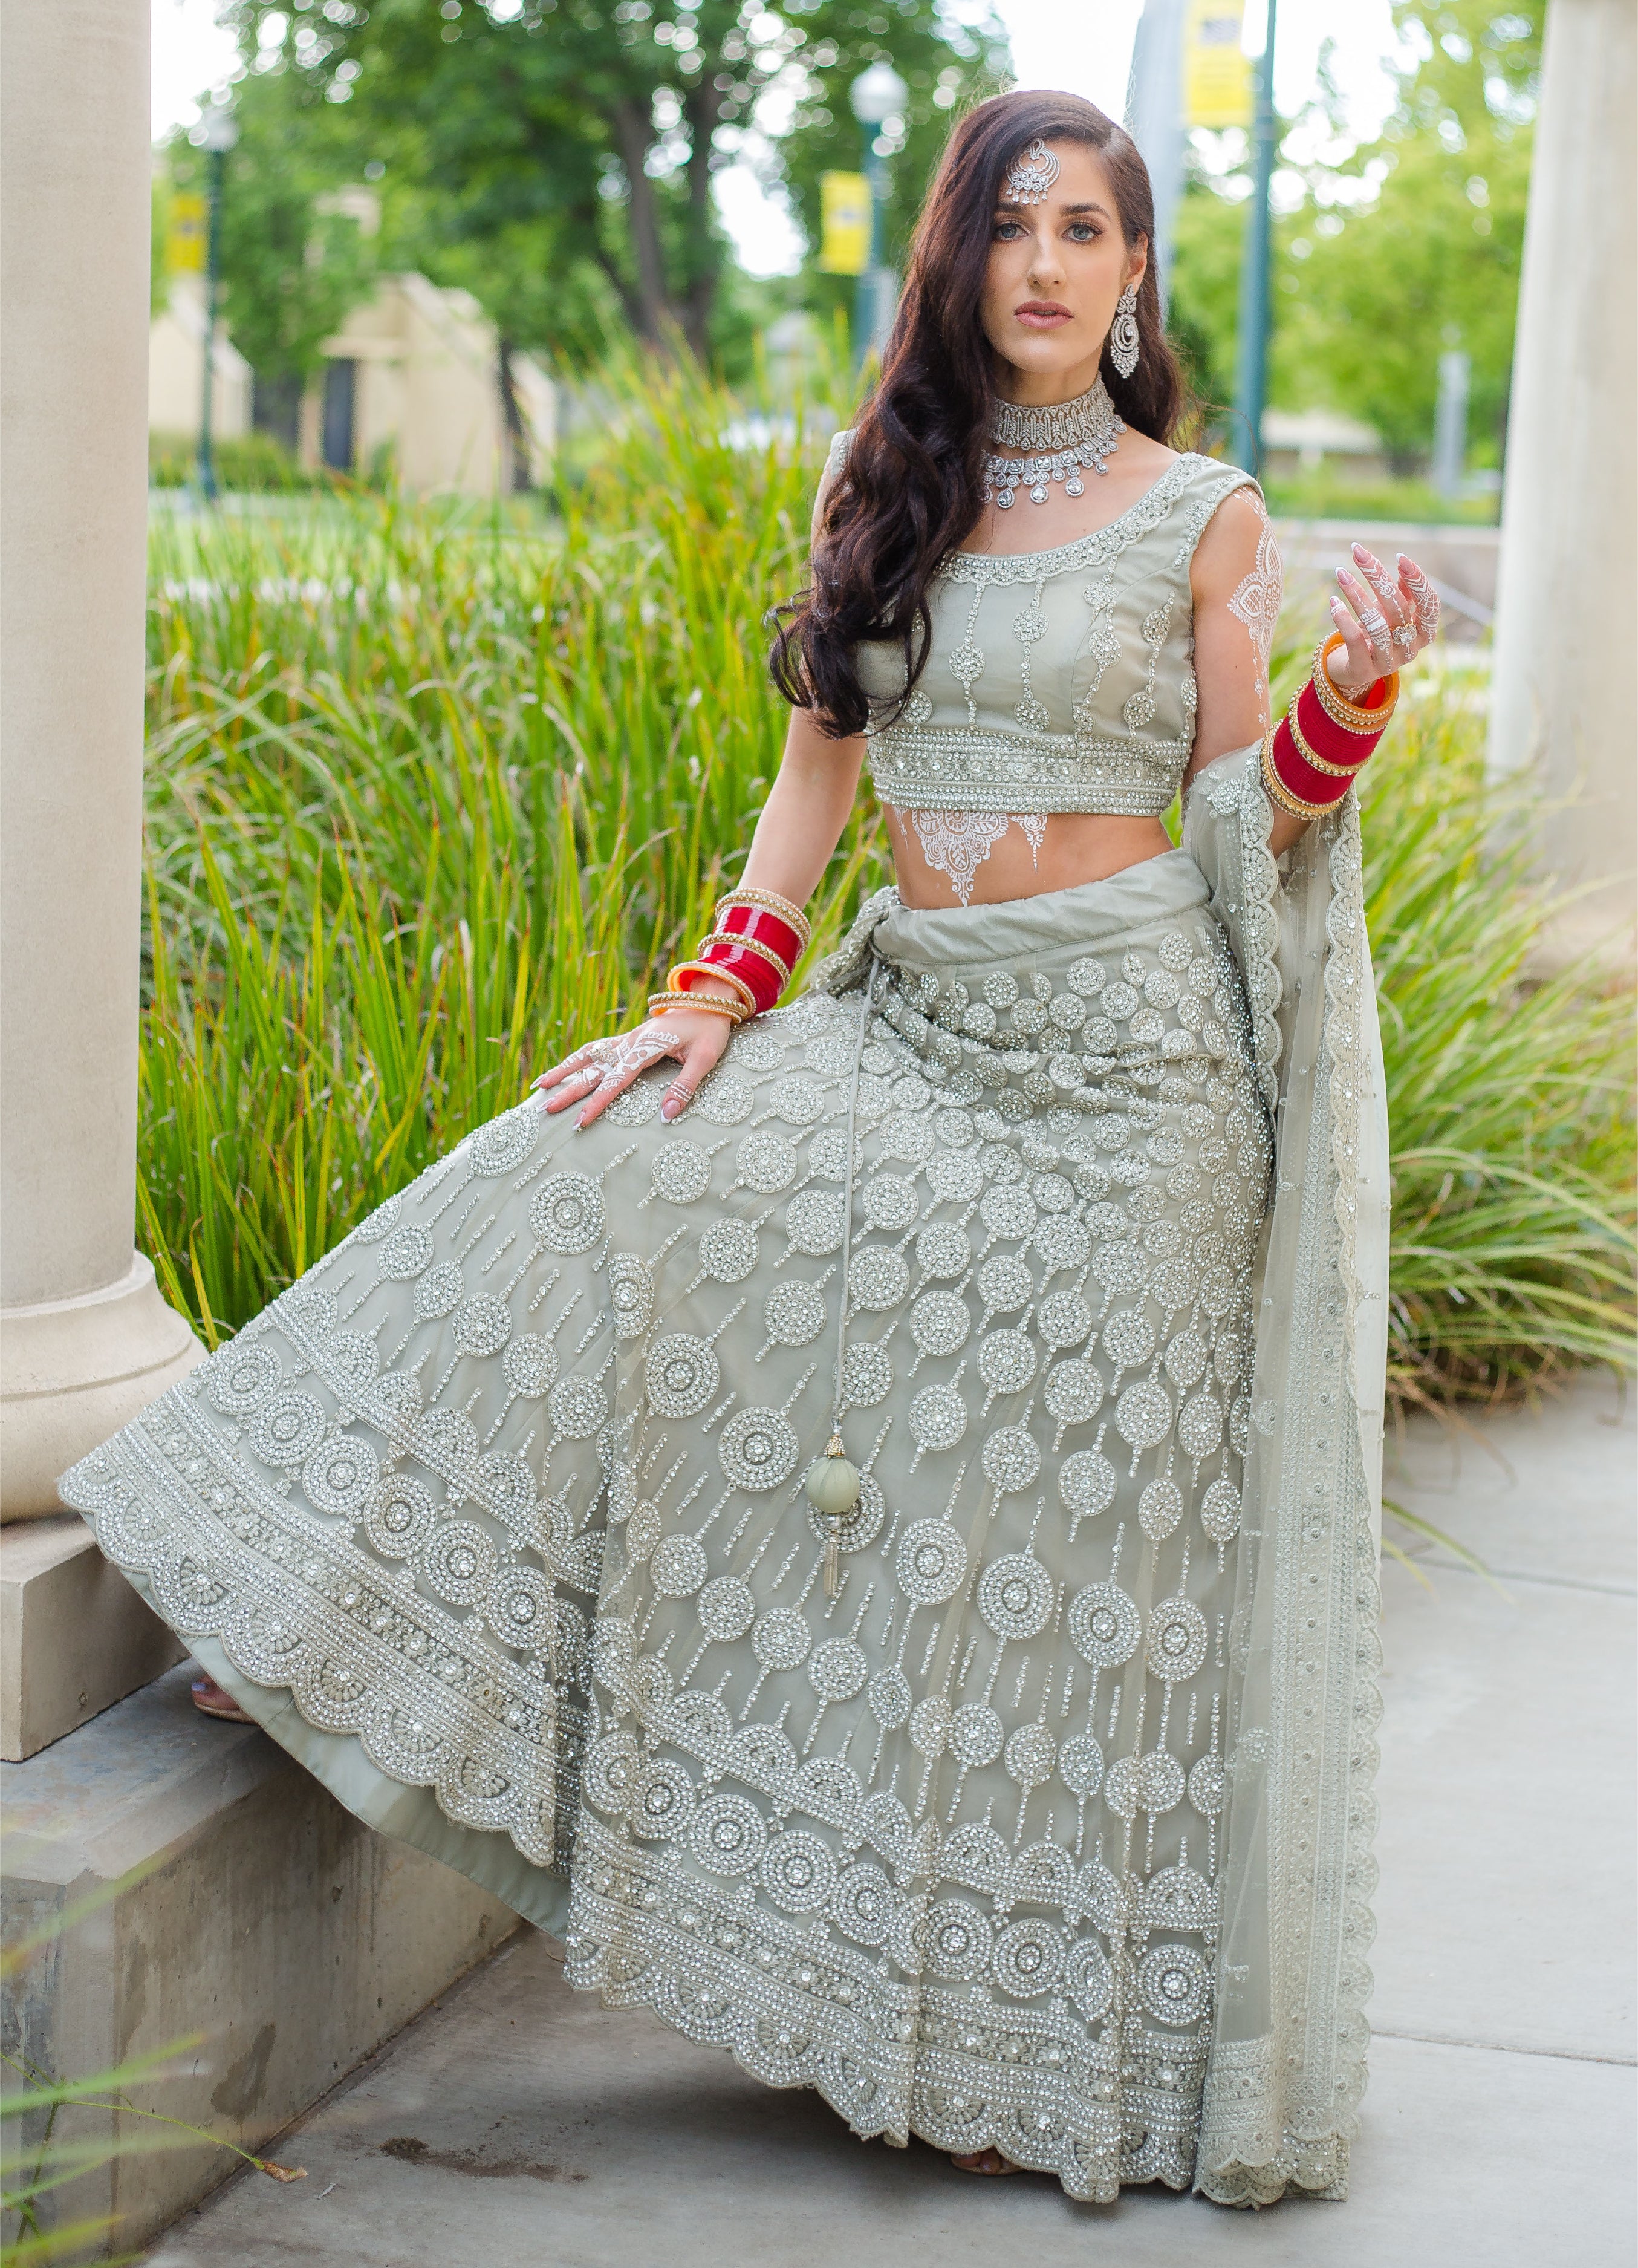 Top 20 Designer Lehenga Cholis just below Rs. 1000 - LooksGud.com | Indian  outfits, Indian attire, Indian fashion